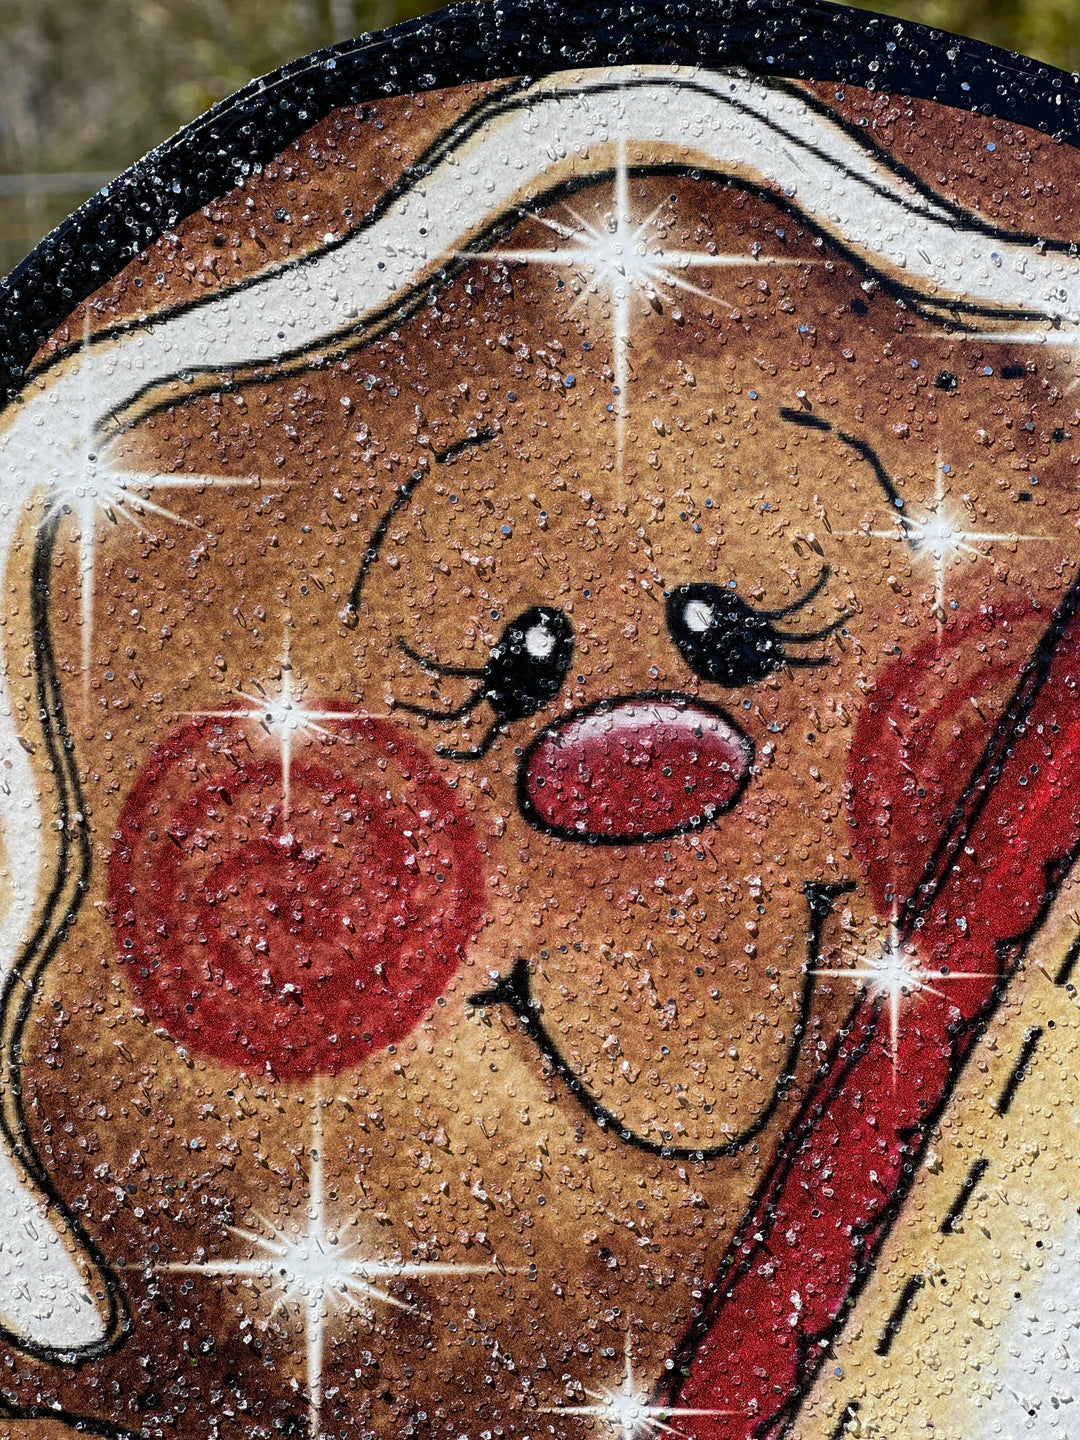 Gingerbread holding Merry Christmas Star Yard Decoration